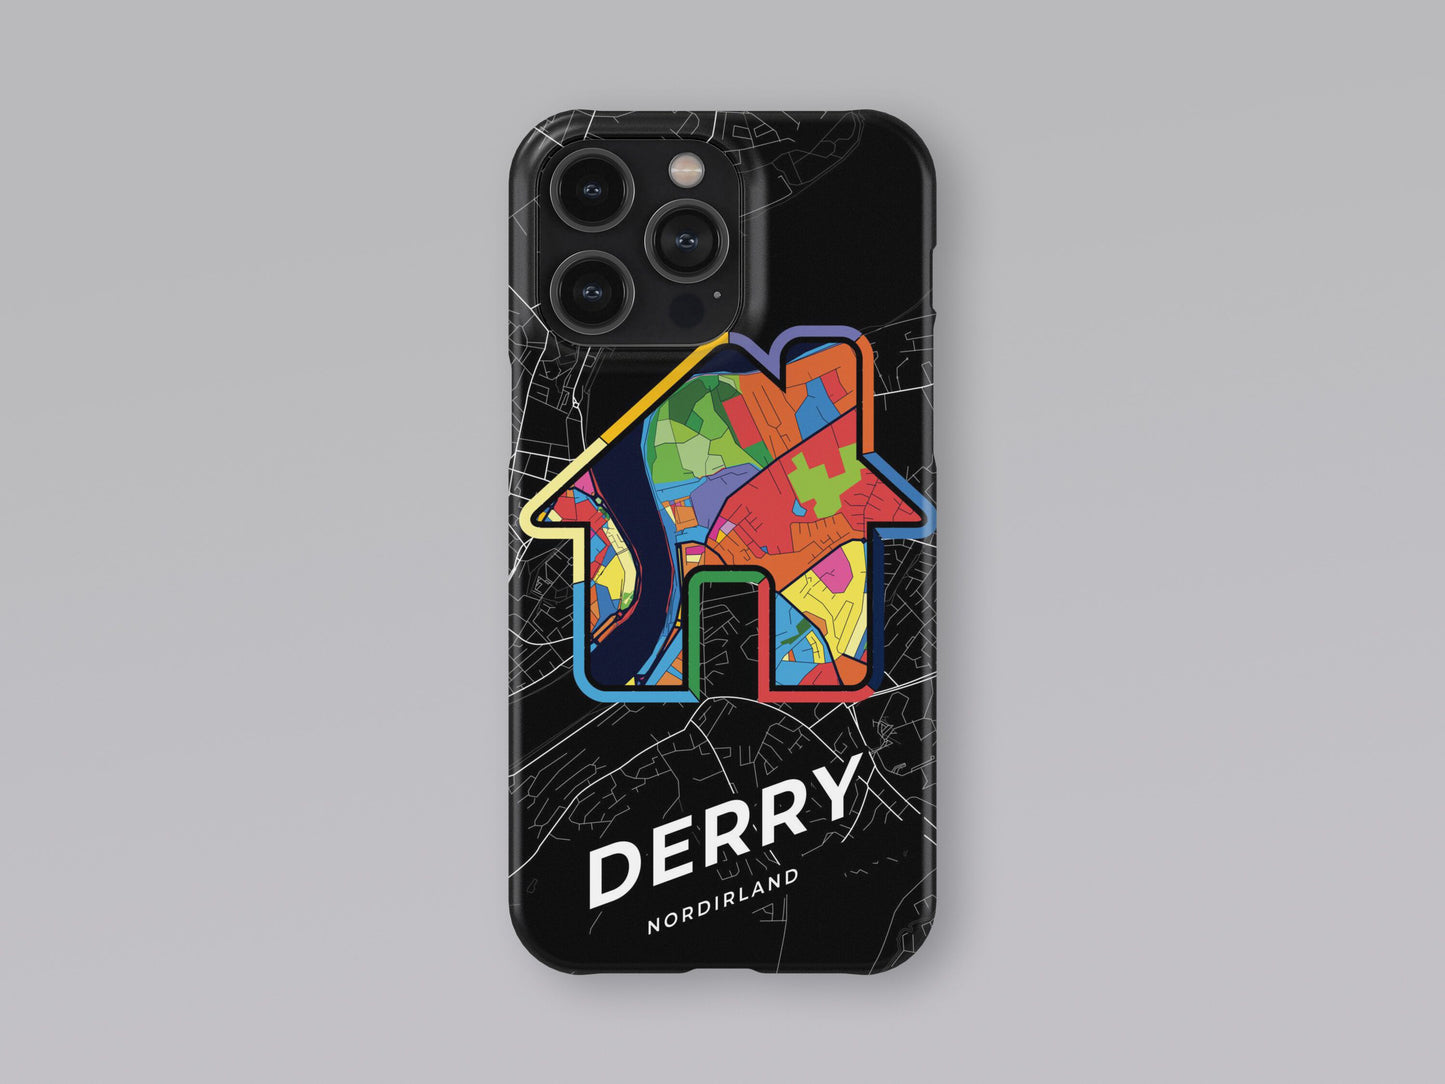 Derry Northern Ireland slim phone case with colorful icon. Birthday, wedding or housewarming gift. Couple match cases. 3